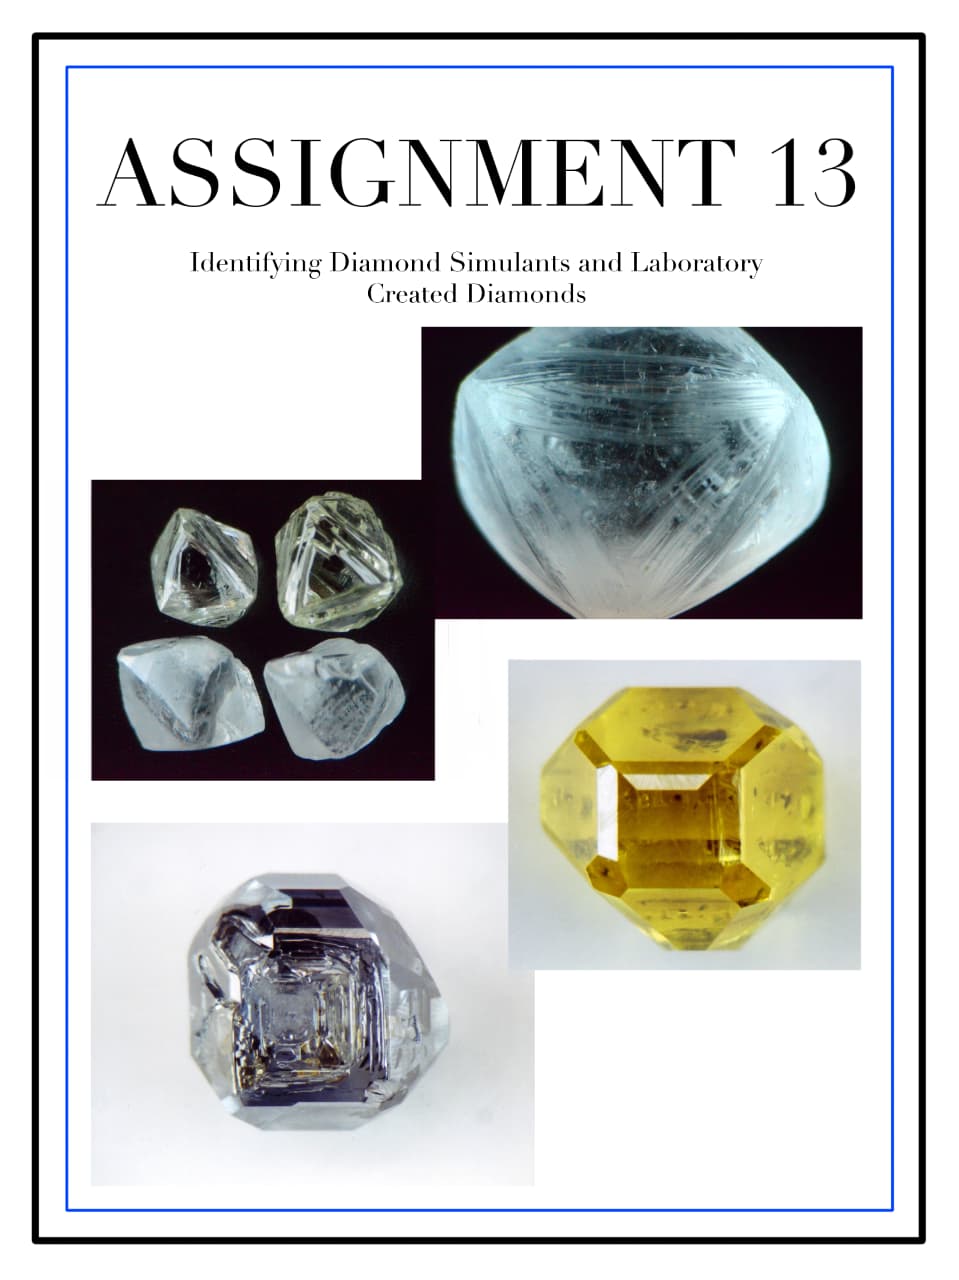 An image of the Assignment 13 cover in the Diamond Course.